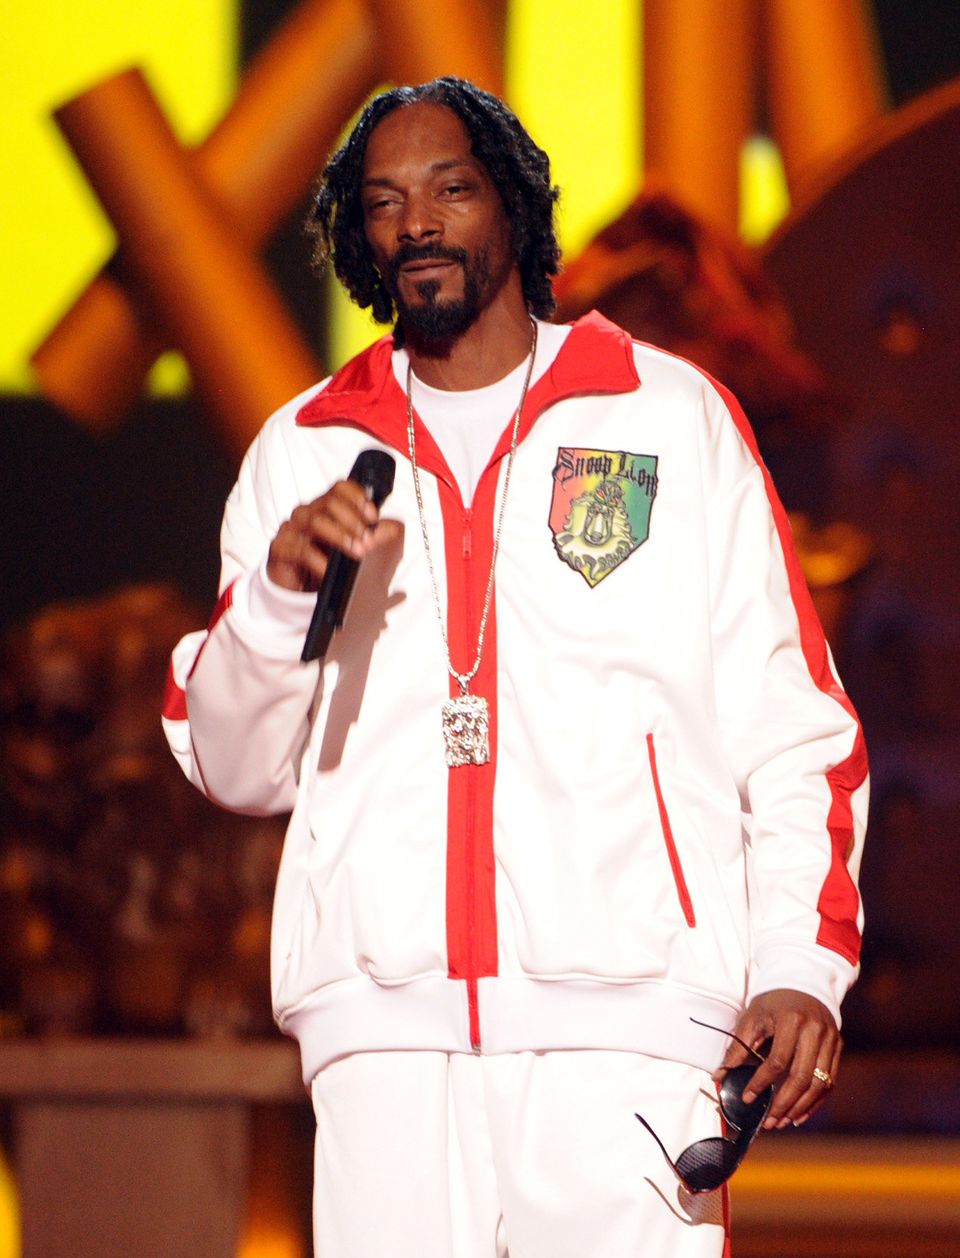 10. Snoop Lion's AMA ("Ask Me Anything")